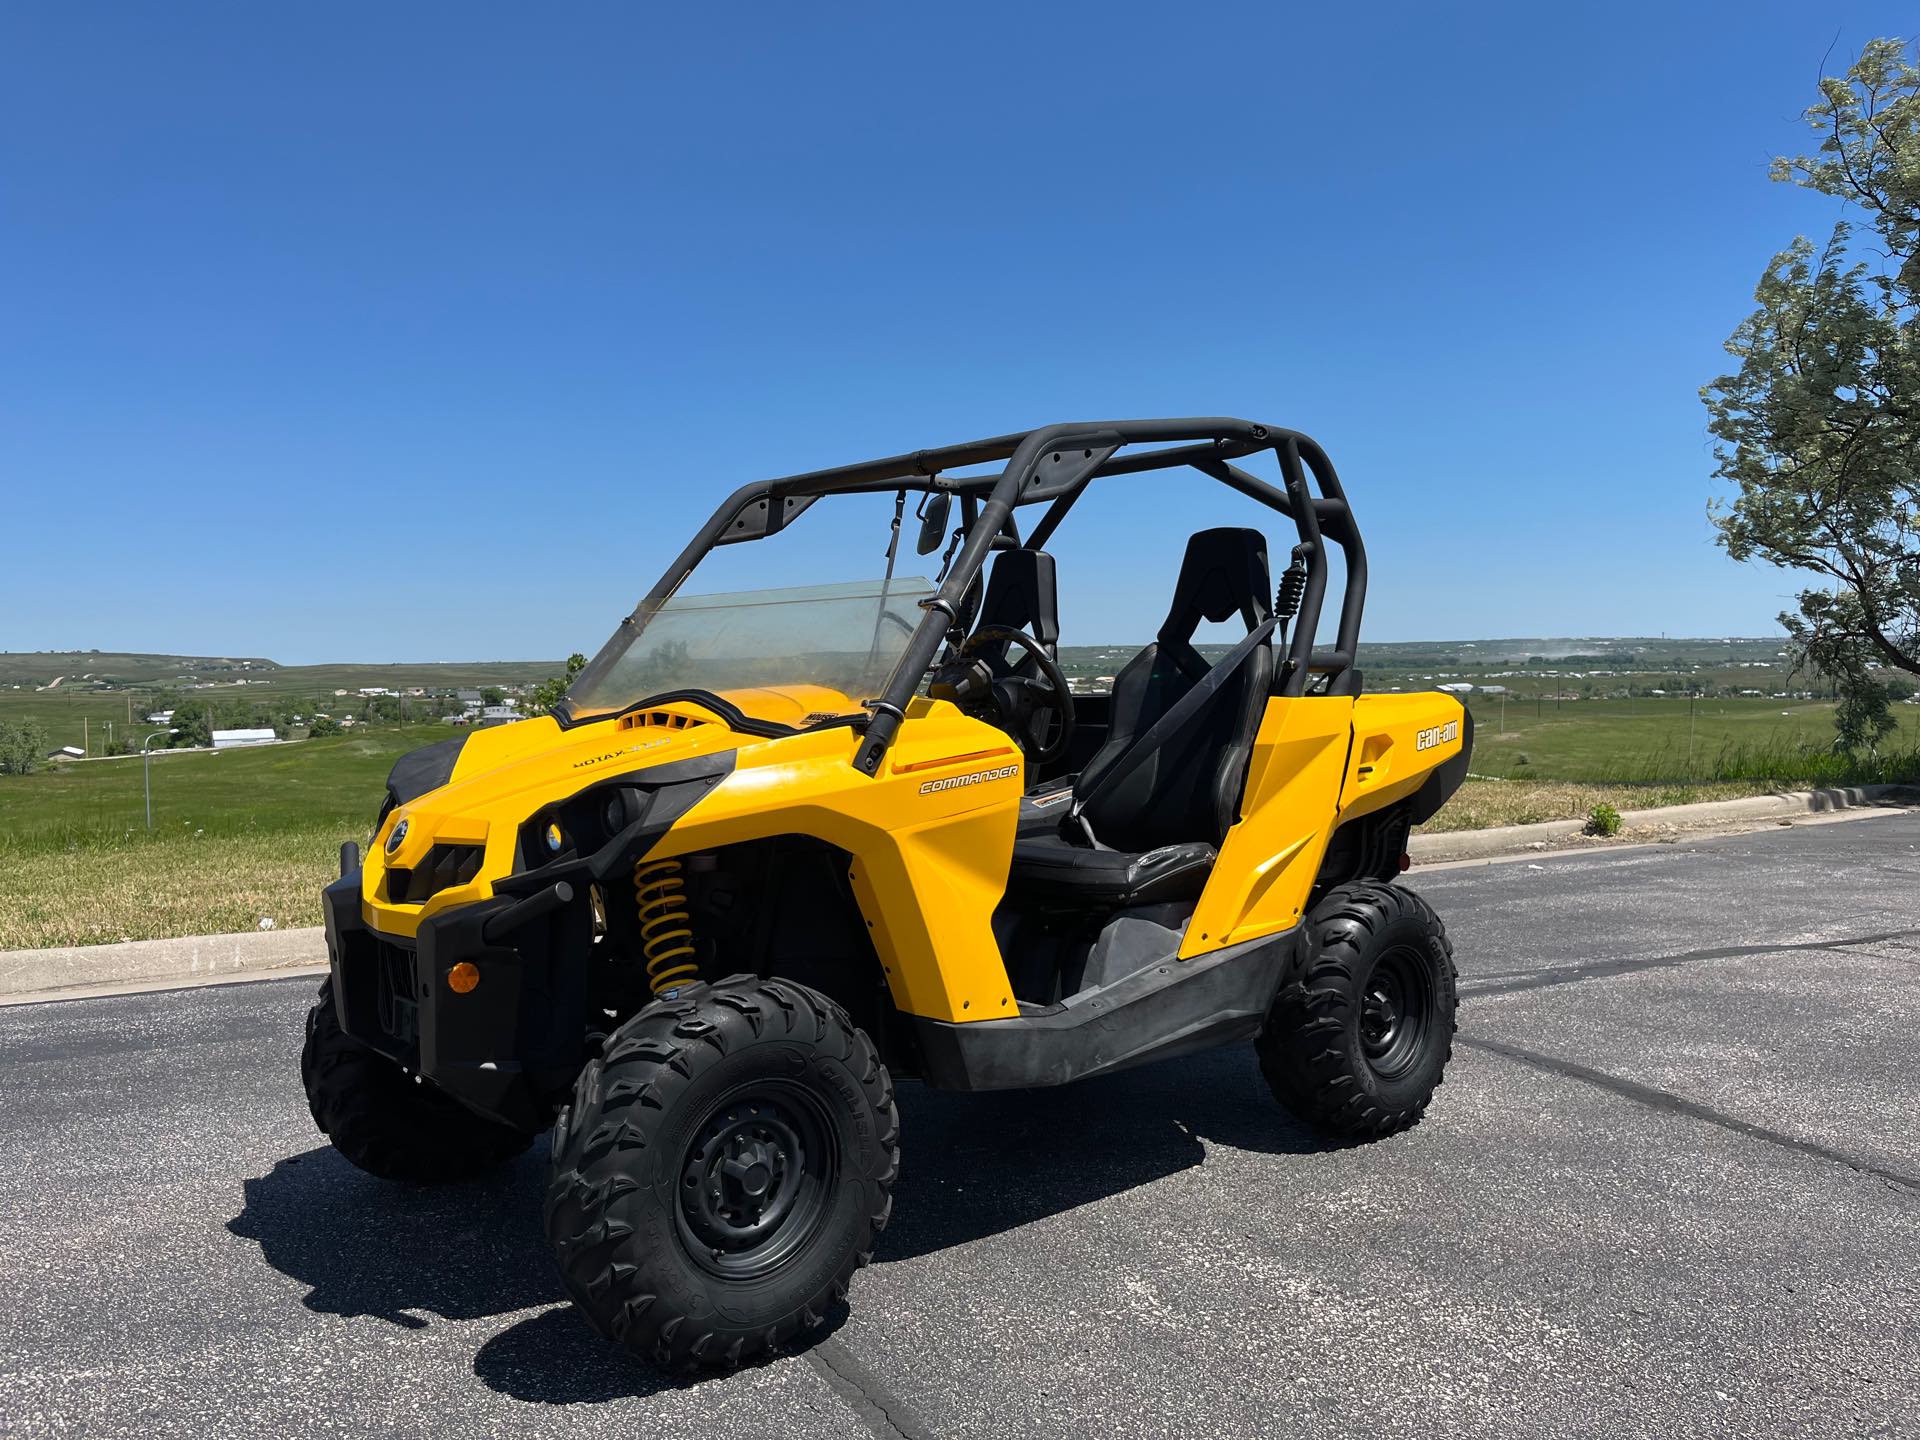 2012 Can-Am Commander 1000 at Mount Rushmore Motorsports